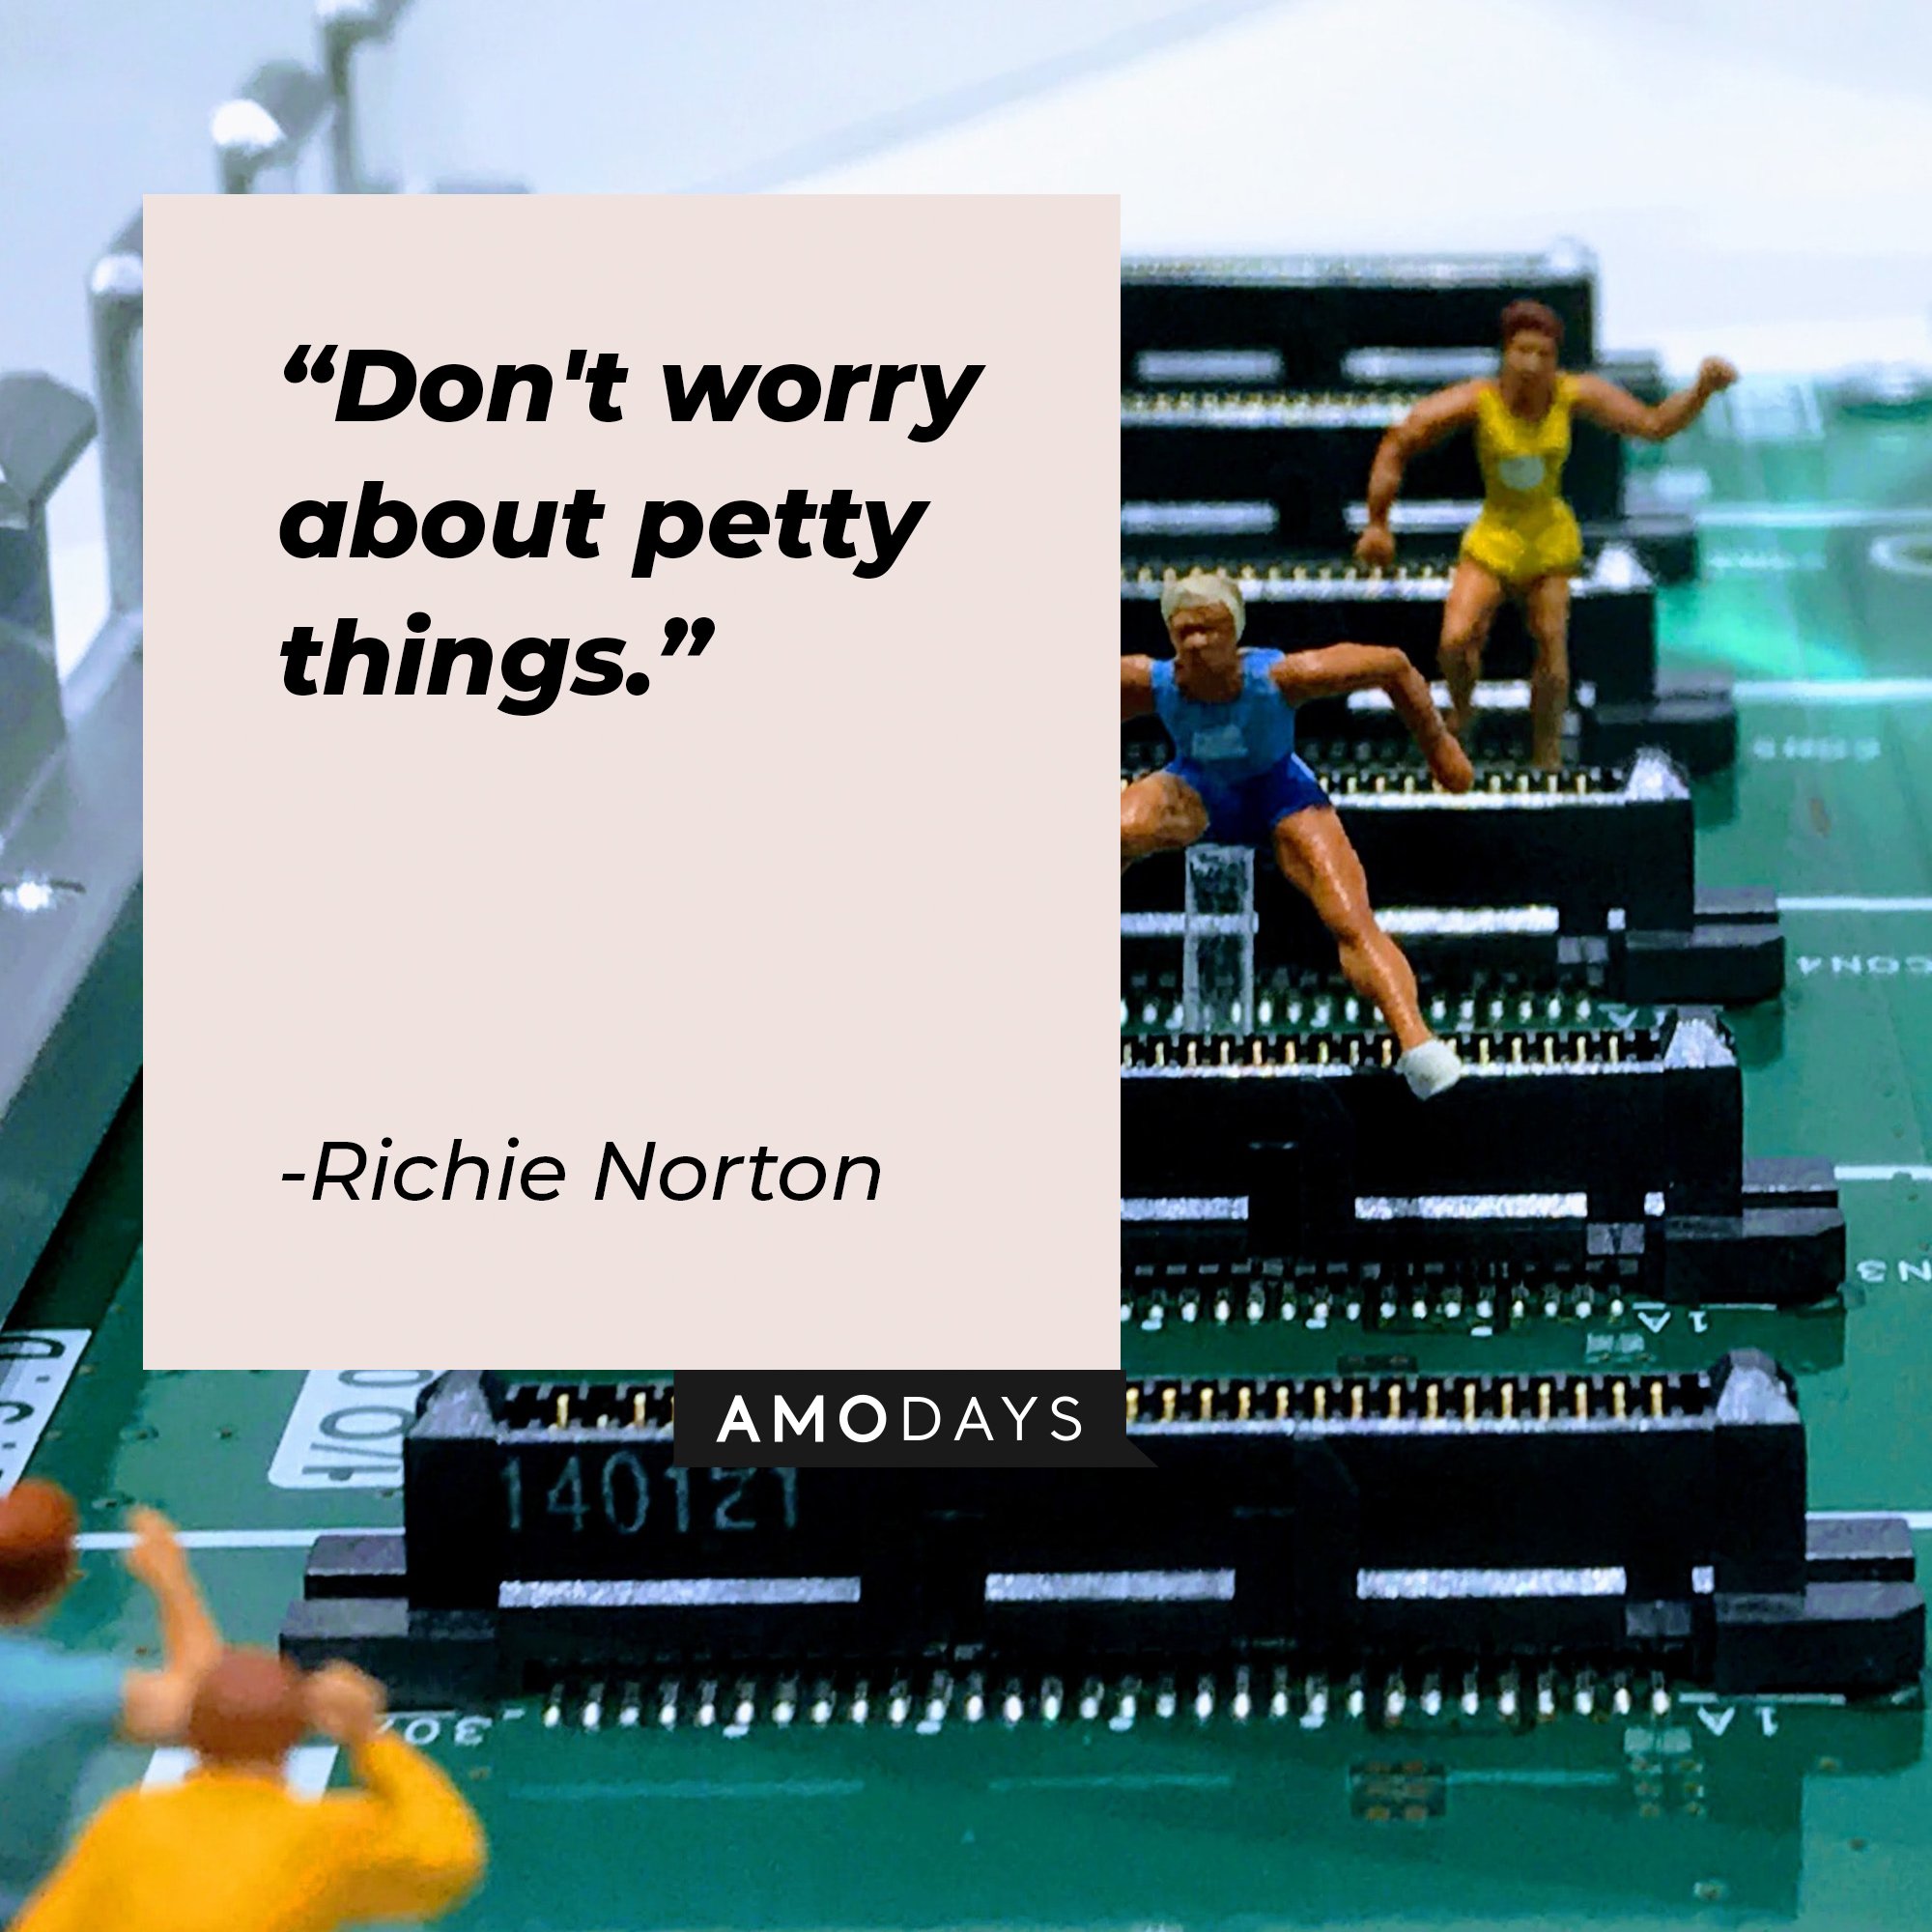 Richie Norton's quote: "Don't worry about petty things." | Image: AmoDays